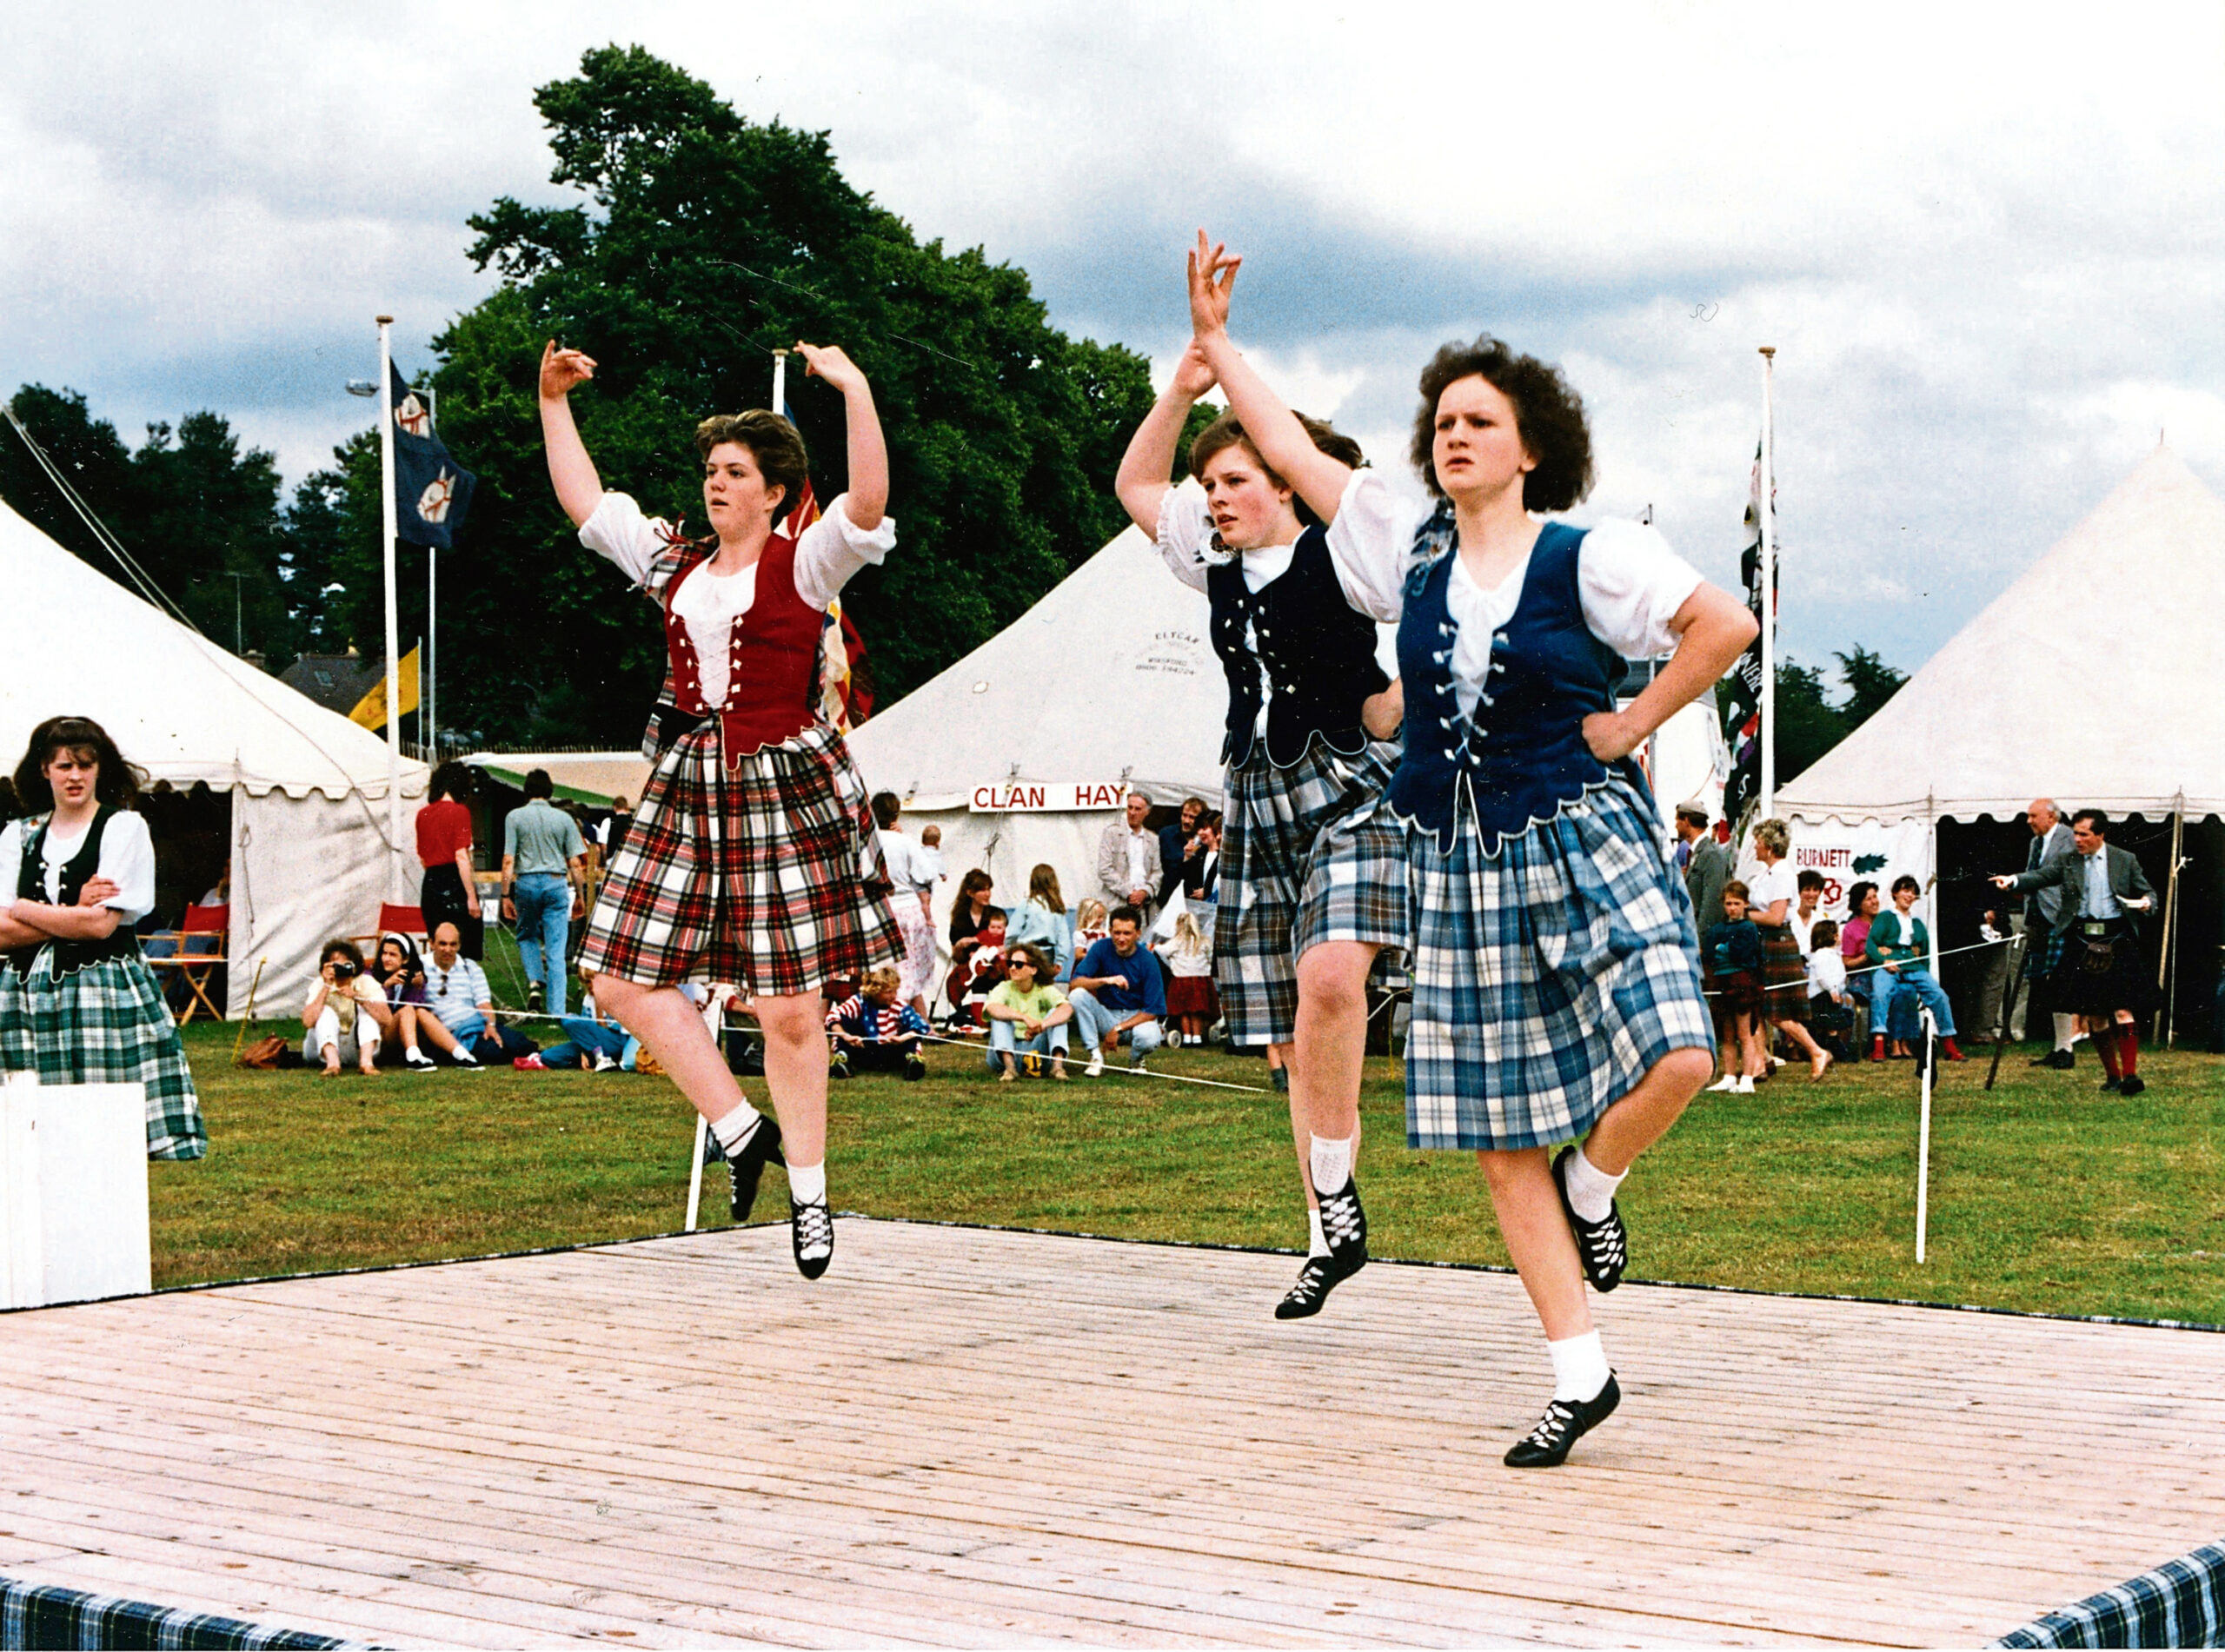 Three young women - Faye Henderson, Anna Thomson and Karen Ogg - competing in the Highland Fling in Aboyne Games 1991.